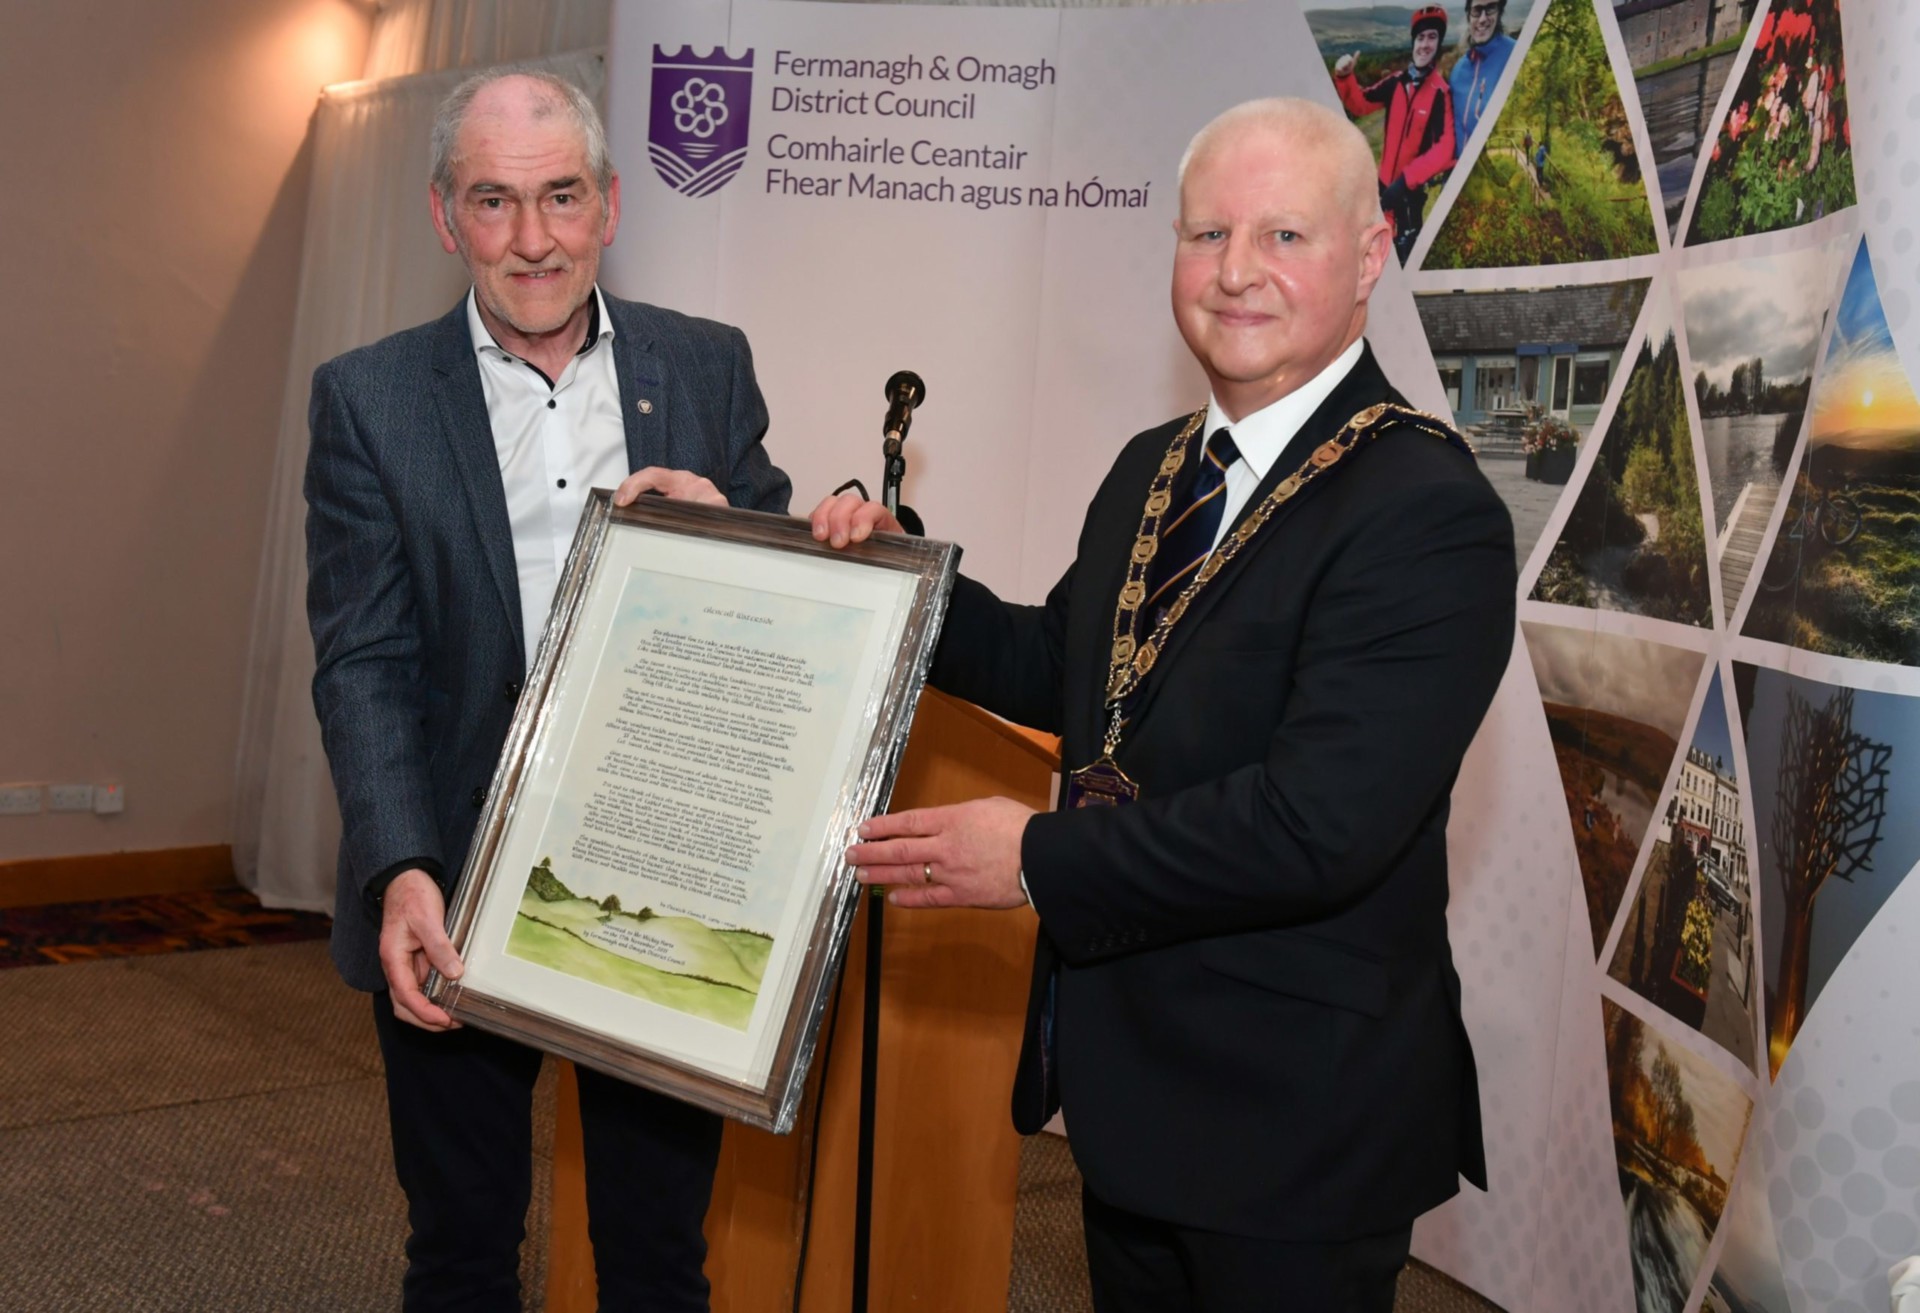 Council honours Mickey Harte with civic reception